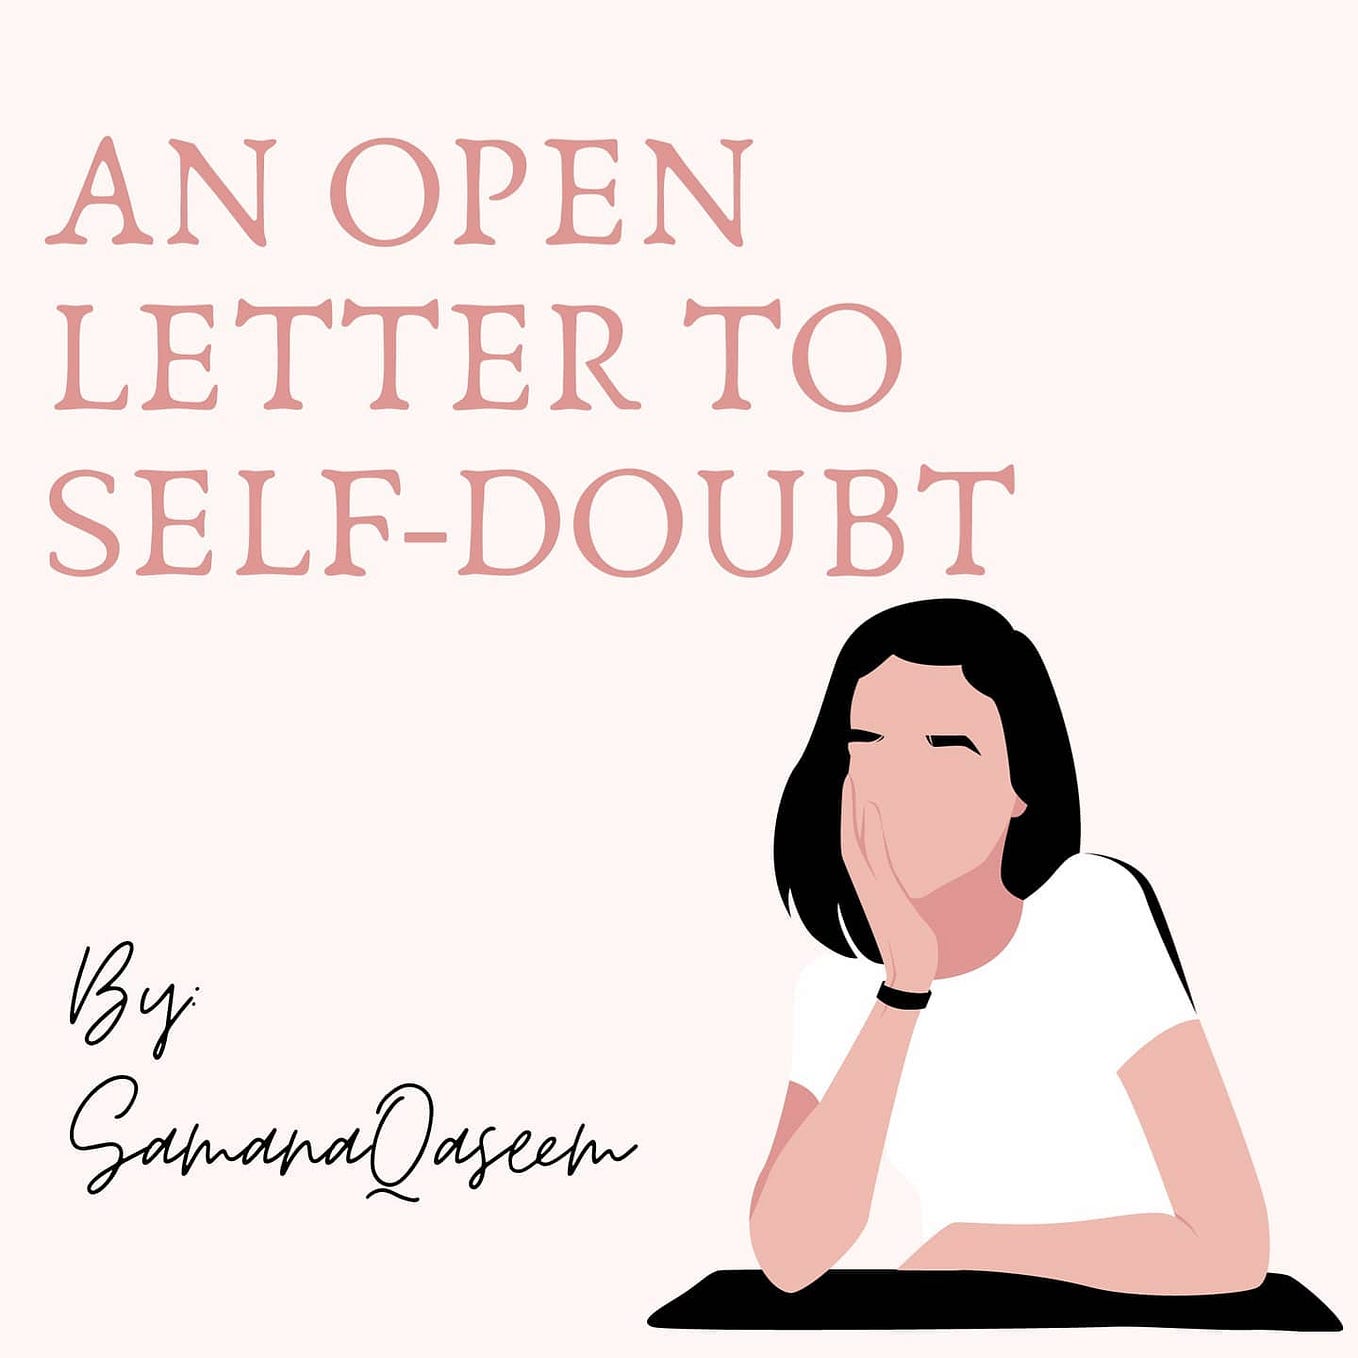 An Open Letter to self-doubt!